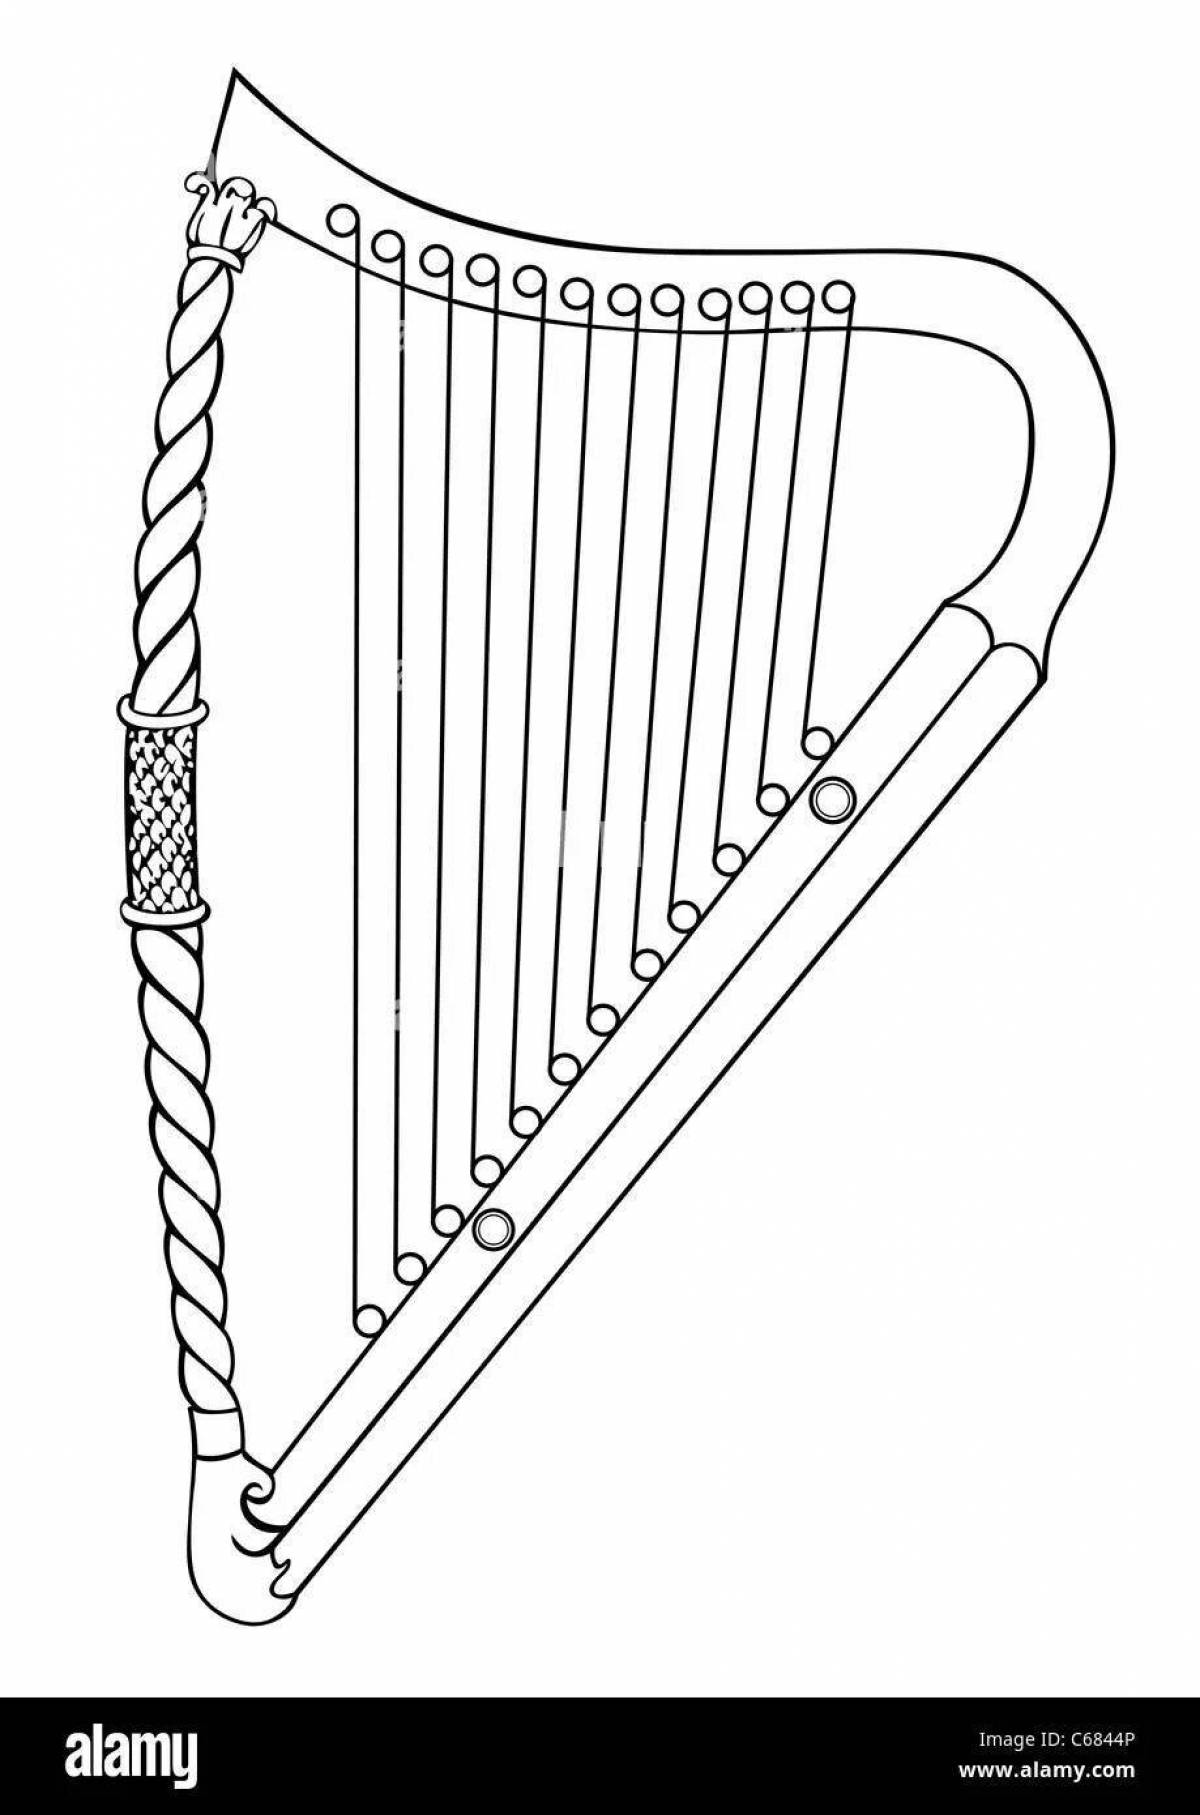 Coloring book exquisite musical instrument psaltery